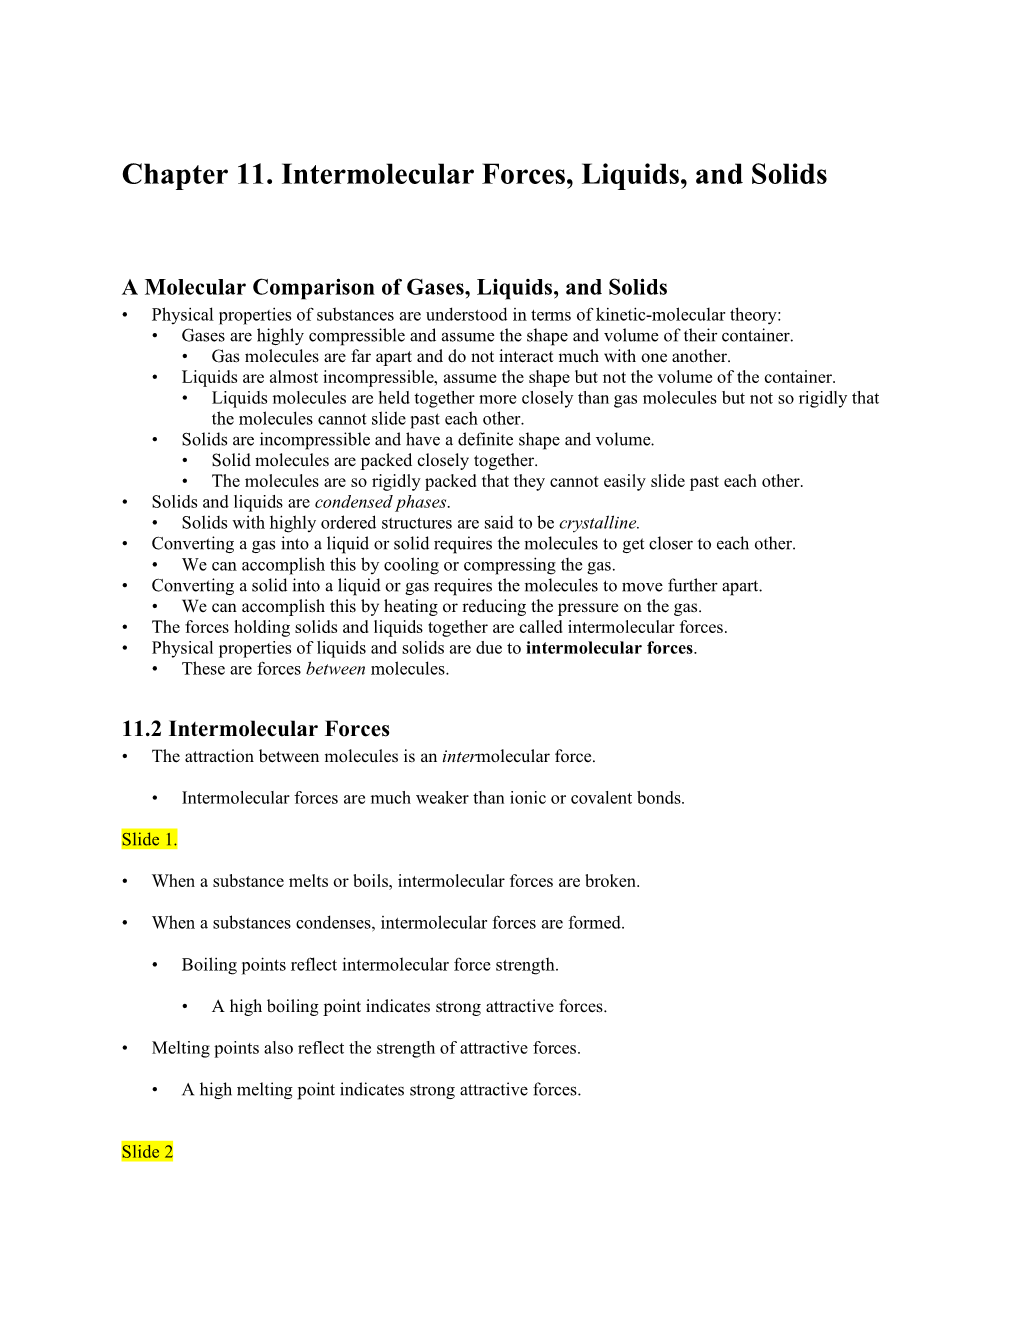 Chapter 11. Intermolecular Forces, Liquids, and Solids